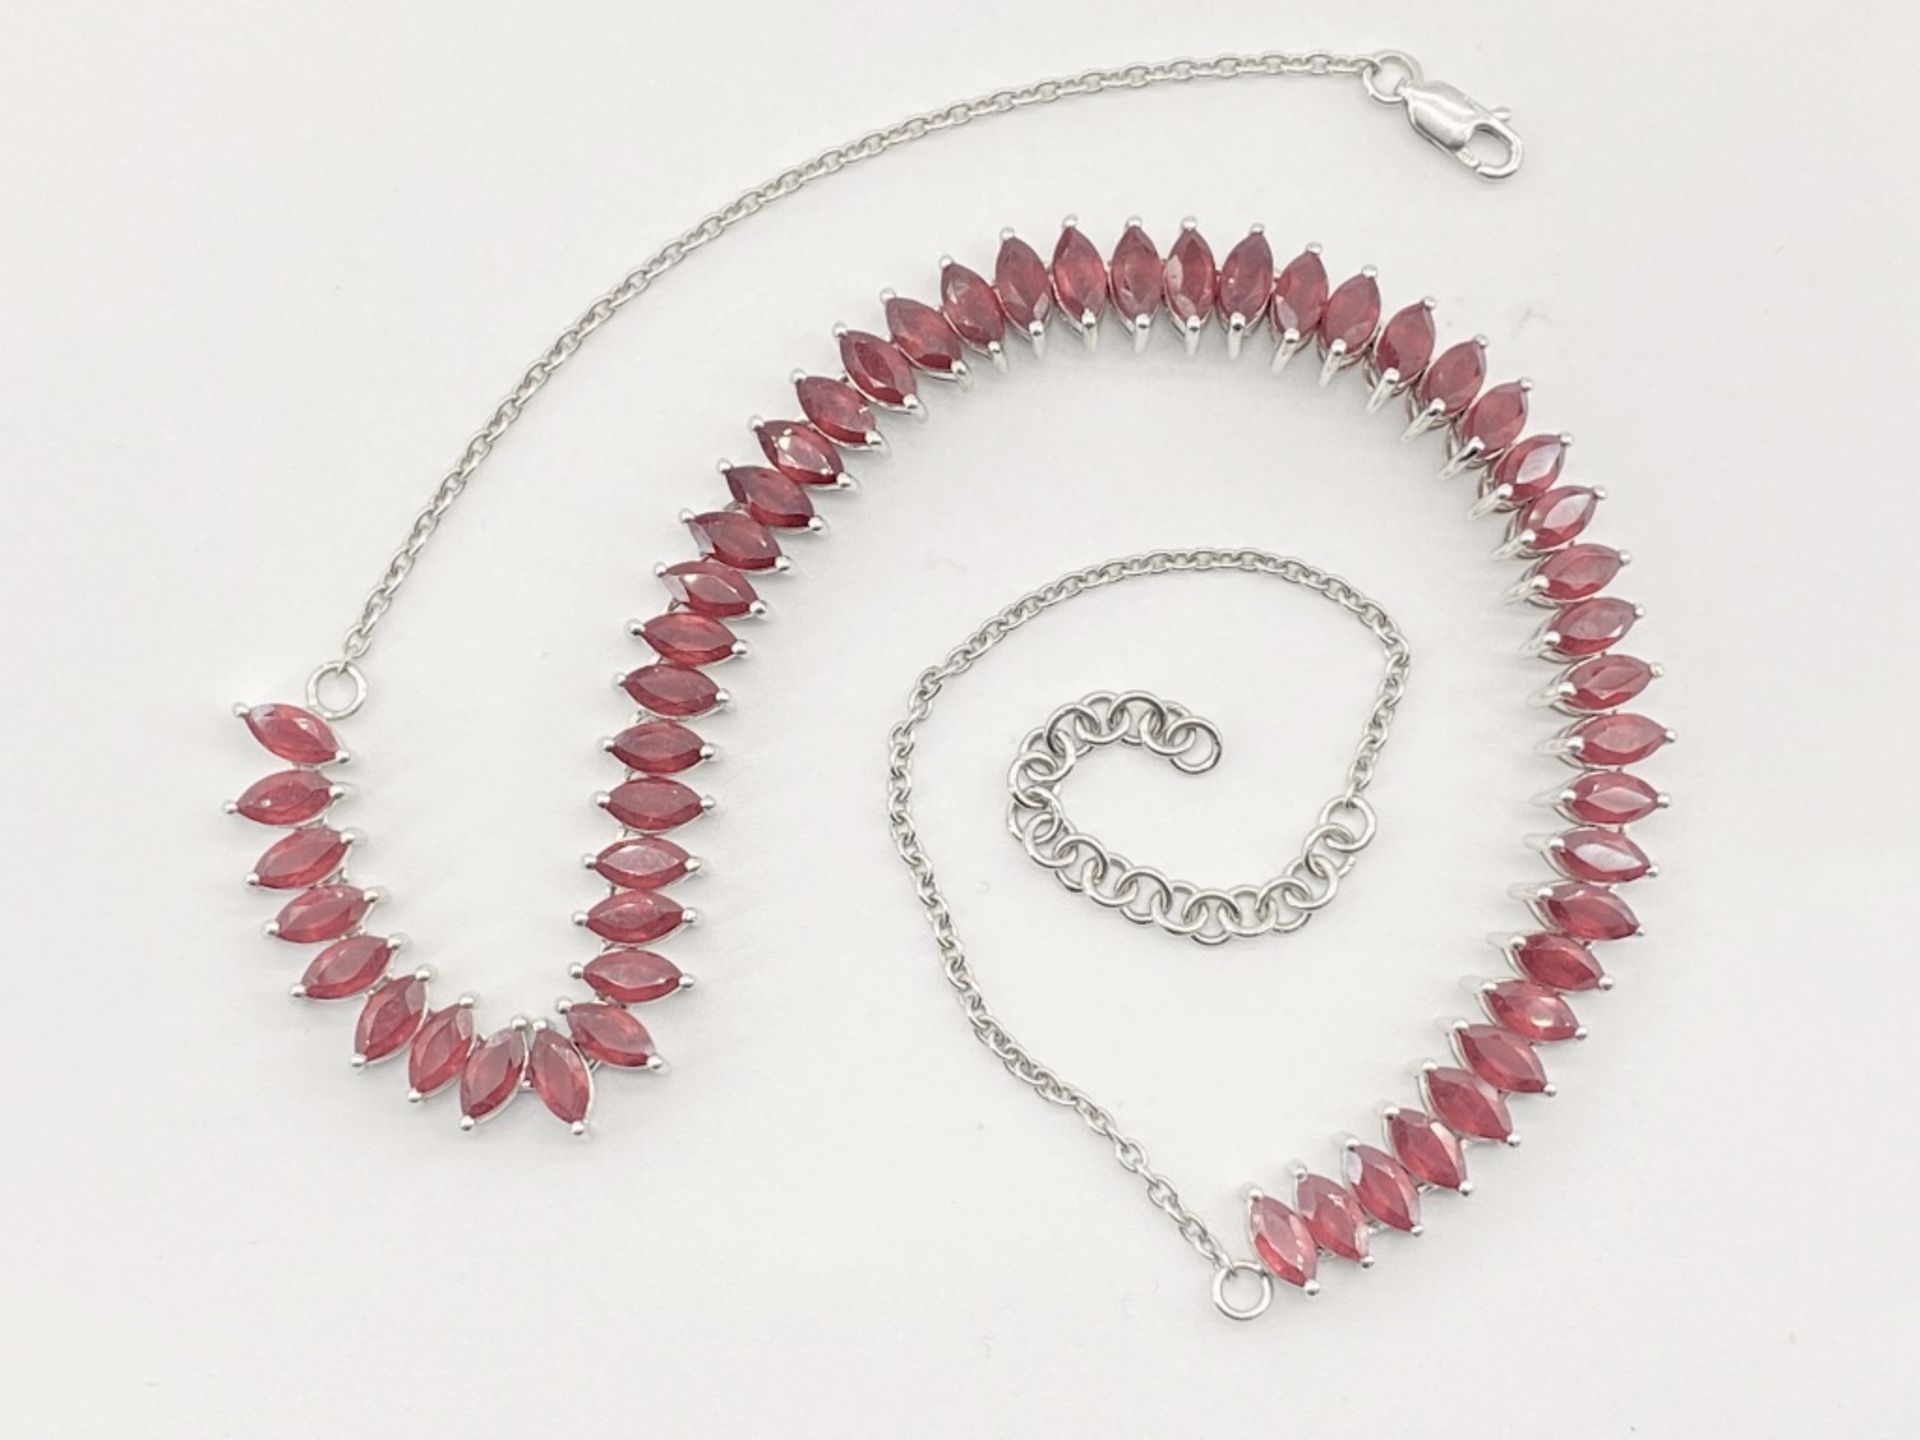 A HALLMARKED 925 SILVER AND MADAGASCAN RUBY NECKLACE. - Image 2 of 3